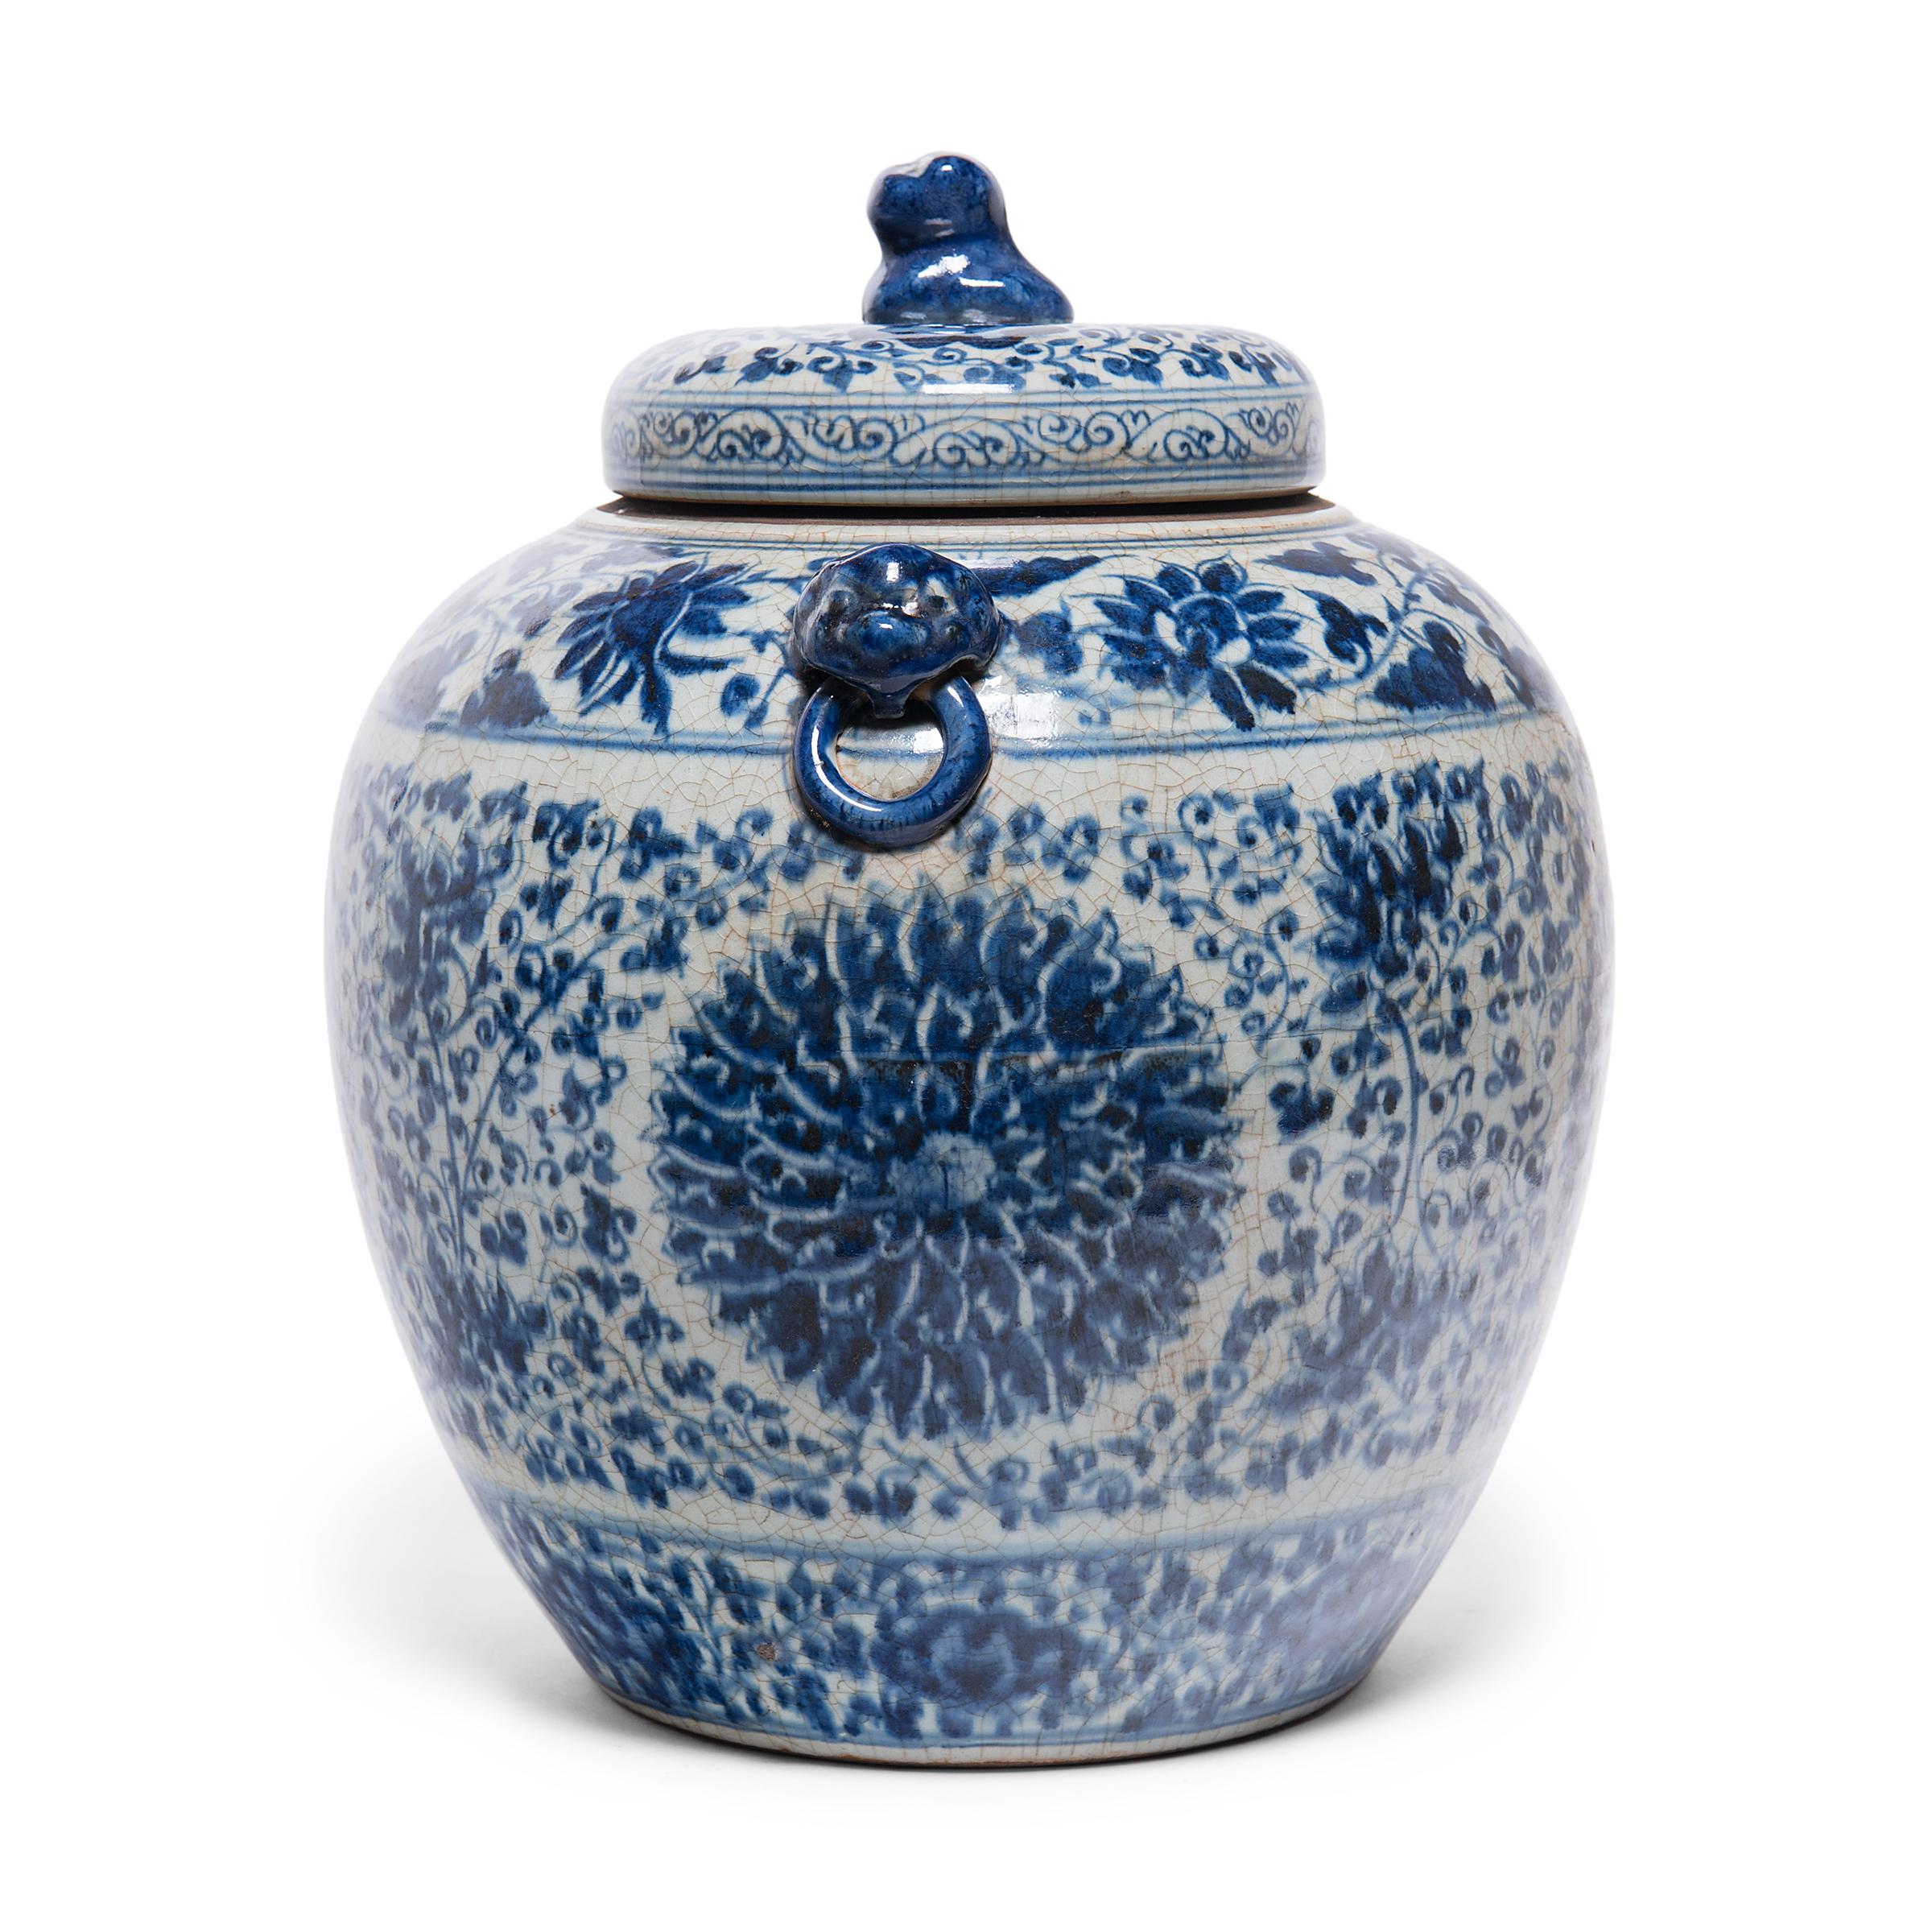 This gorgeous ginger jar continues a centuries-old tradition of Chinese blue-and-white porcelain ware. Painted with expressive brushwork, the jar is festooned with trailing vines and flower blossoms, densely patterned around large chrysanthemum